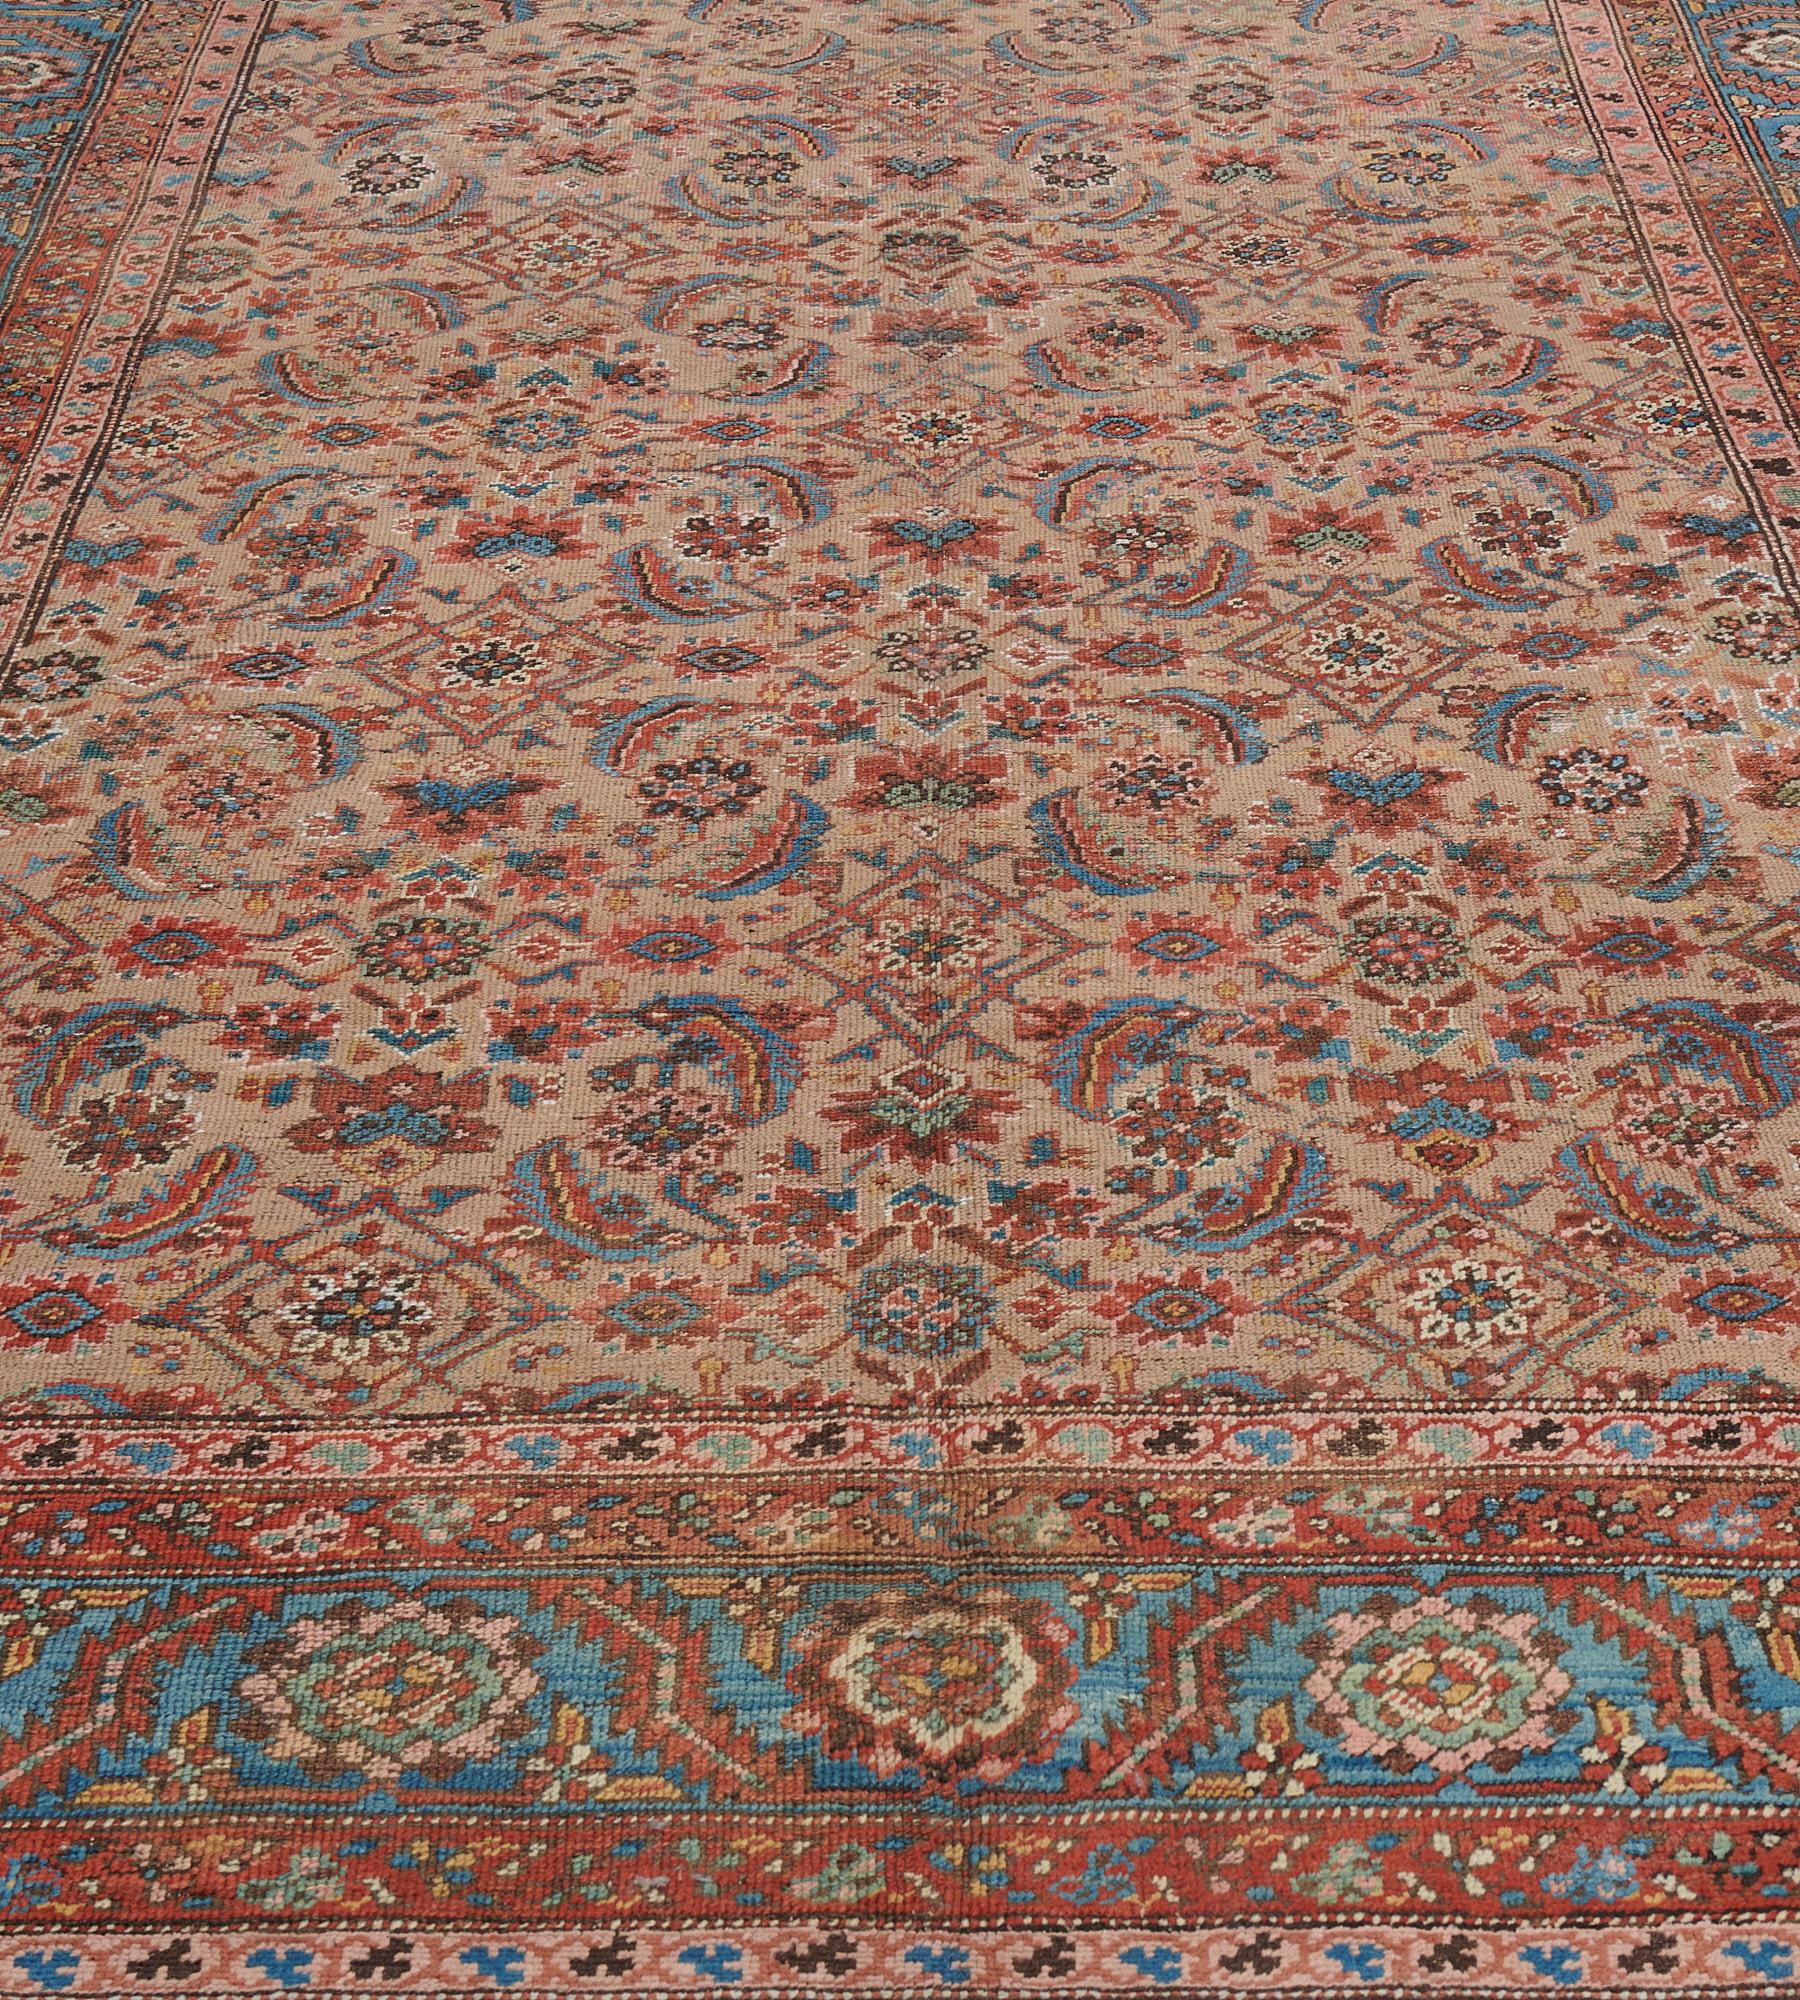 Antique Circa-1880 Herati-pattern Persian Bakshaish Rug In Good Condition For Sale In West Hollywood, CA